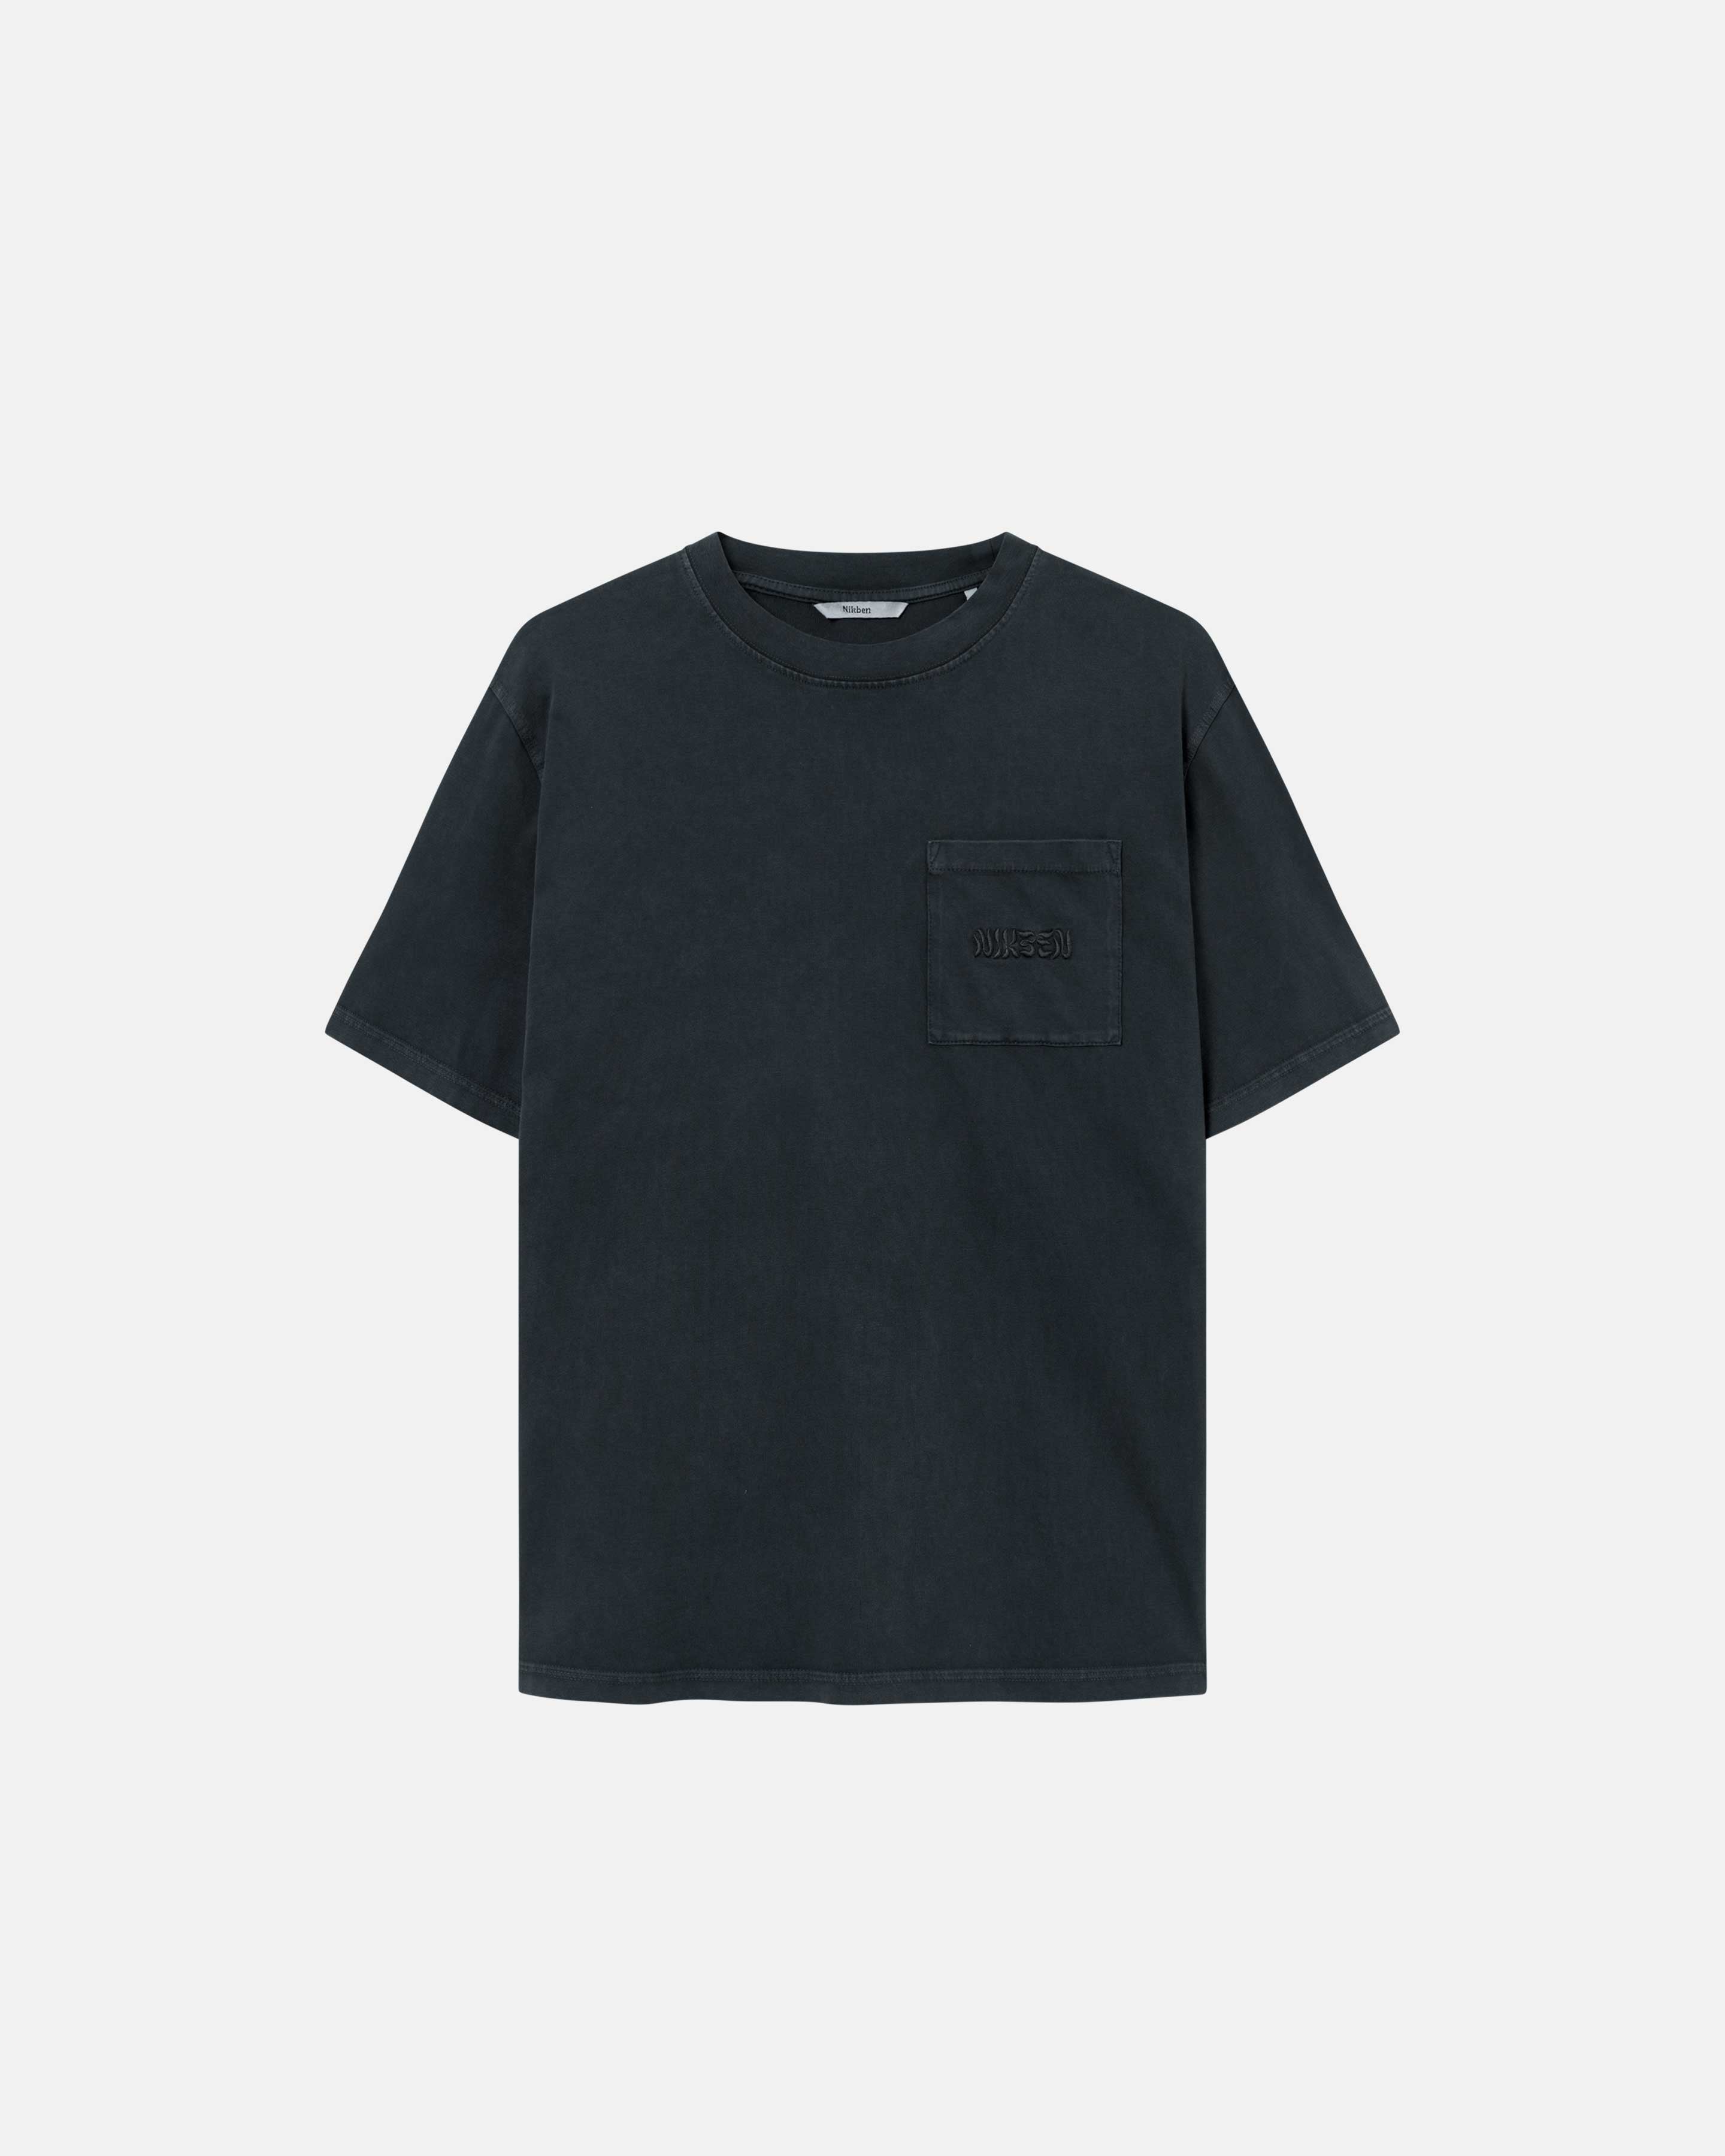 Washed black t-shirt with breast pocket and embroidered logo.